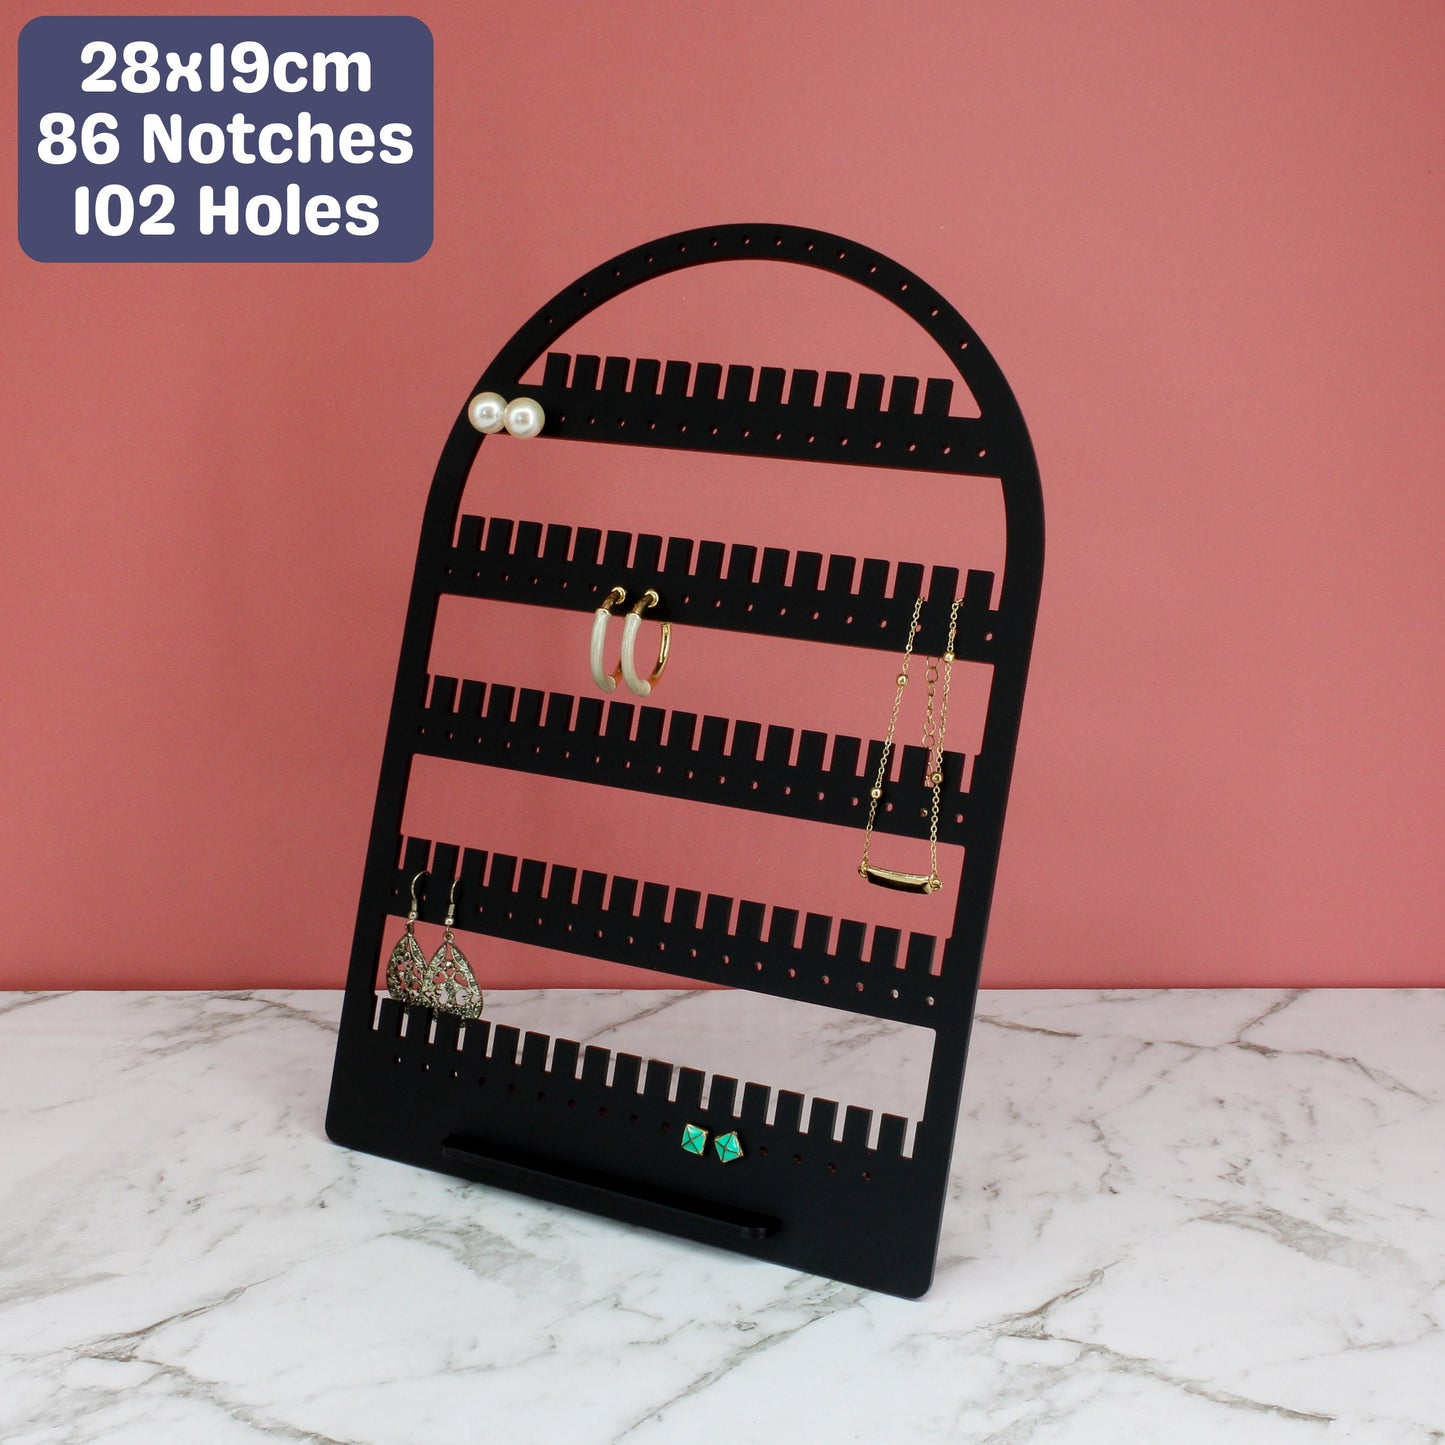 Earring Holder Plate - Black Arch Stud Earring Stand - Acrylic Jewellery Display